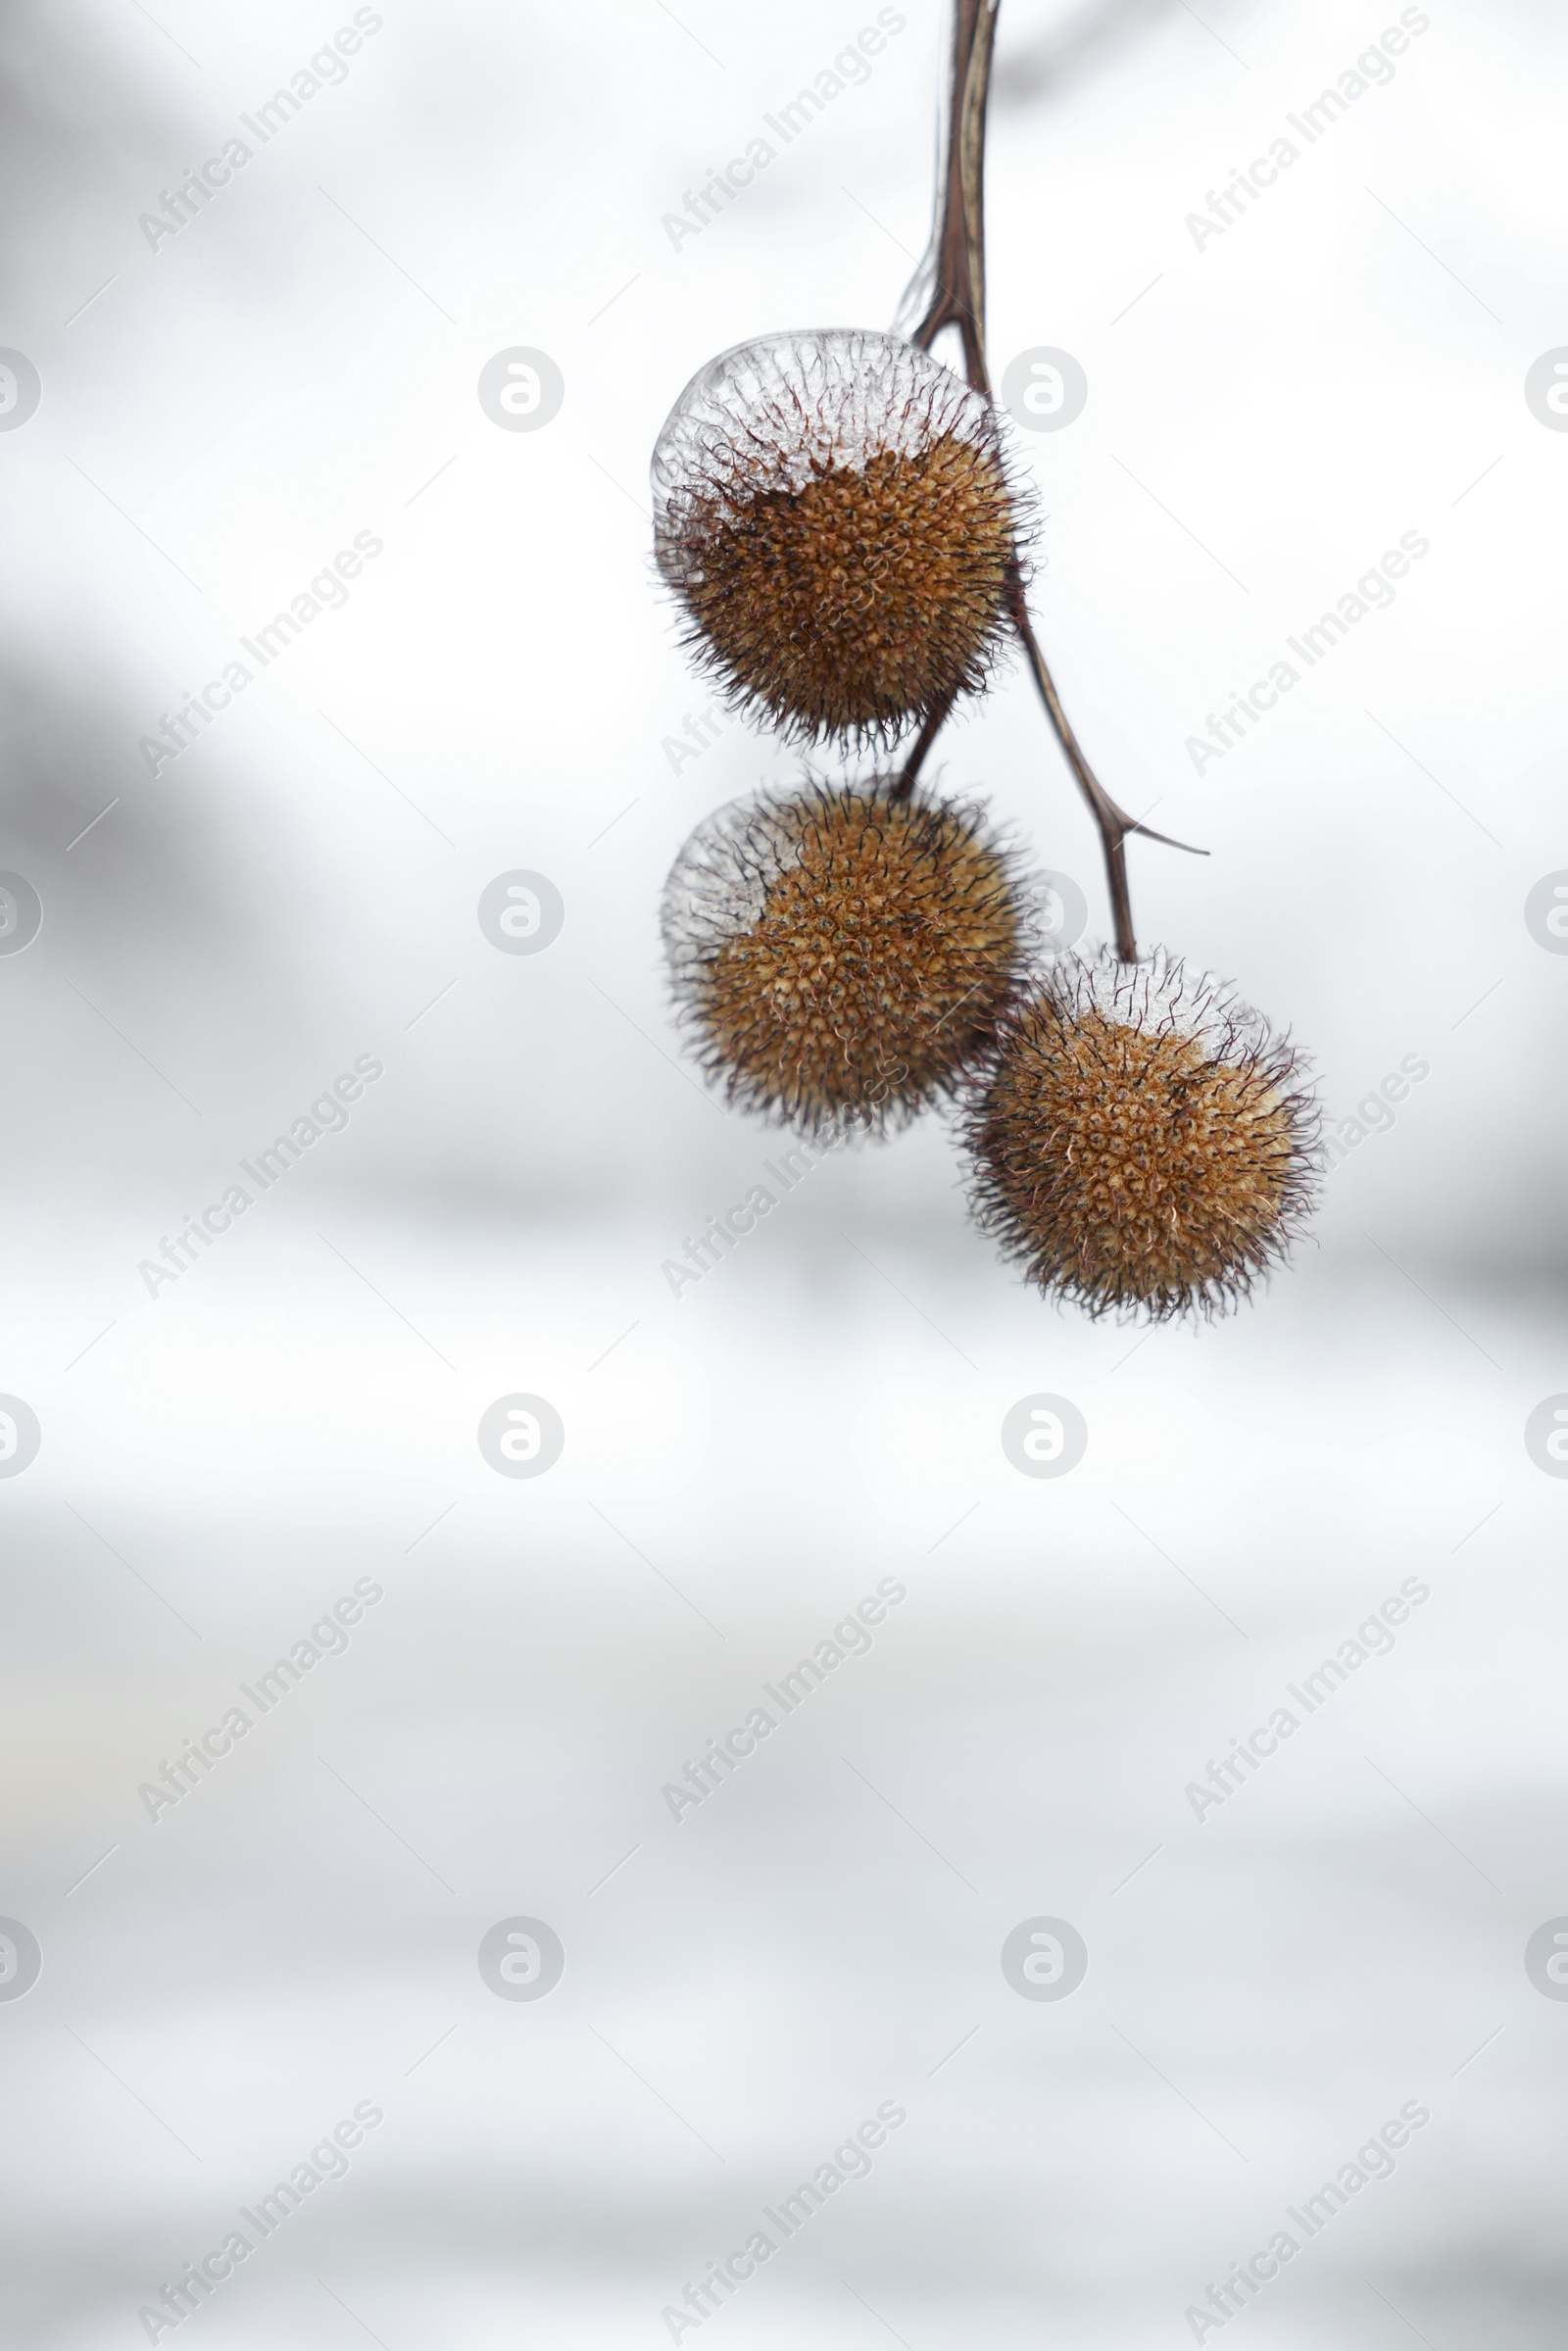 Photo of Closeup view of sycamore tree with seed balls in ice glaze outdoors on winter day. Space for text